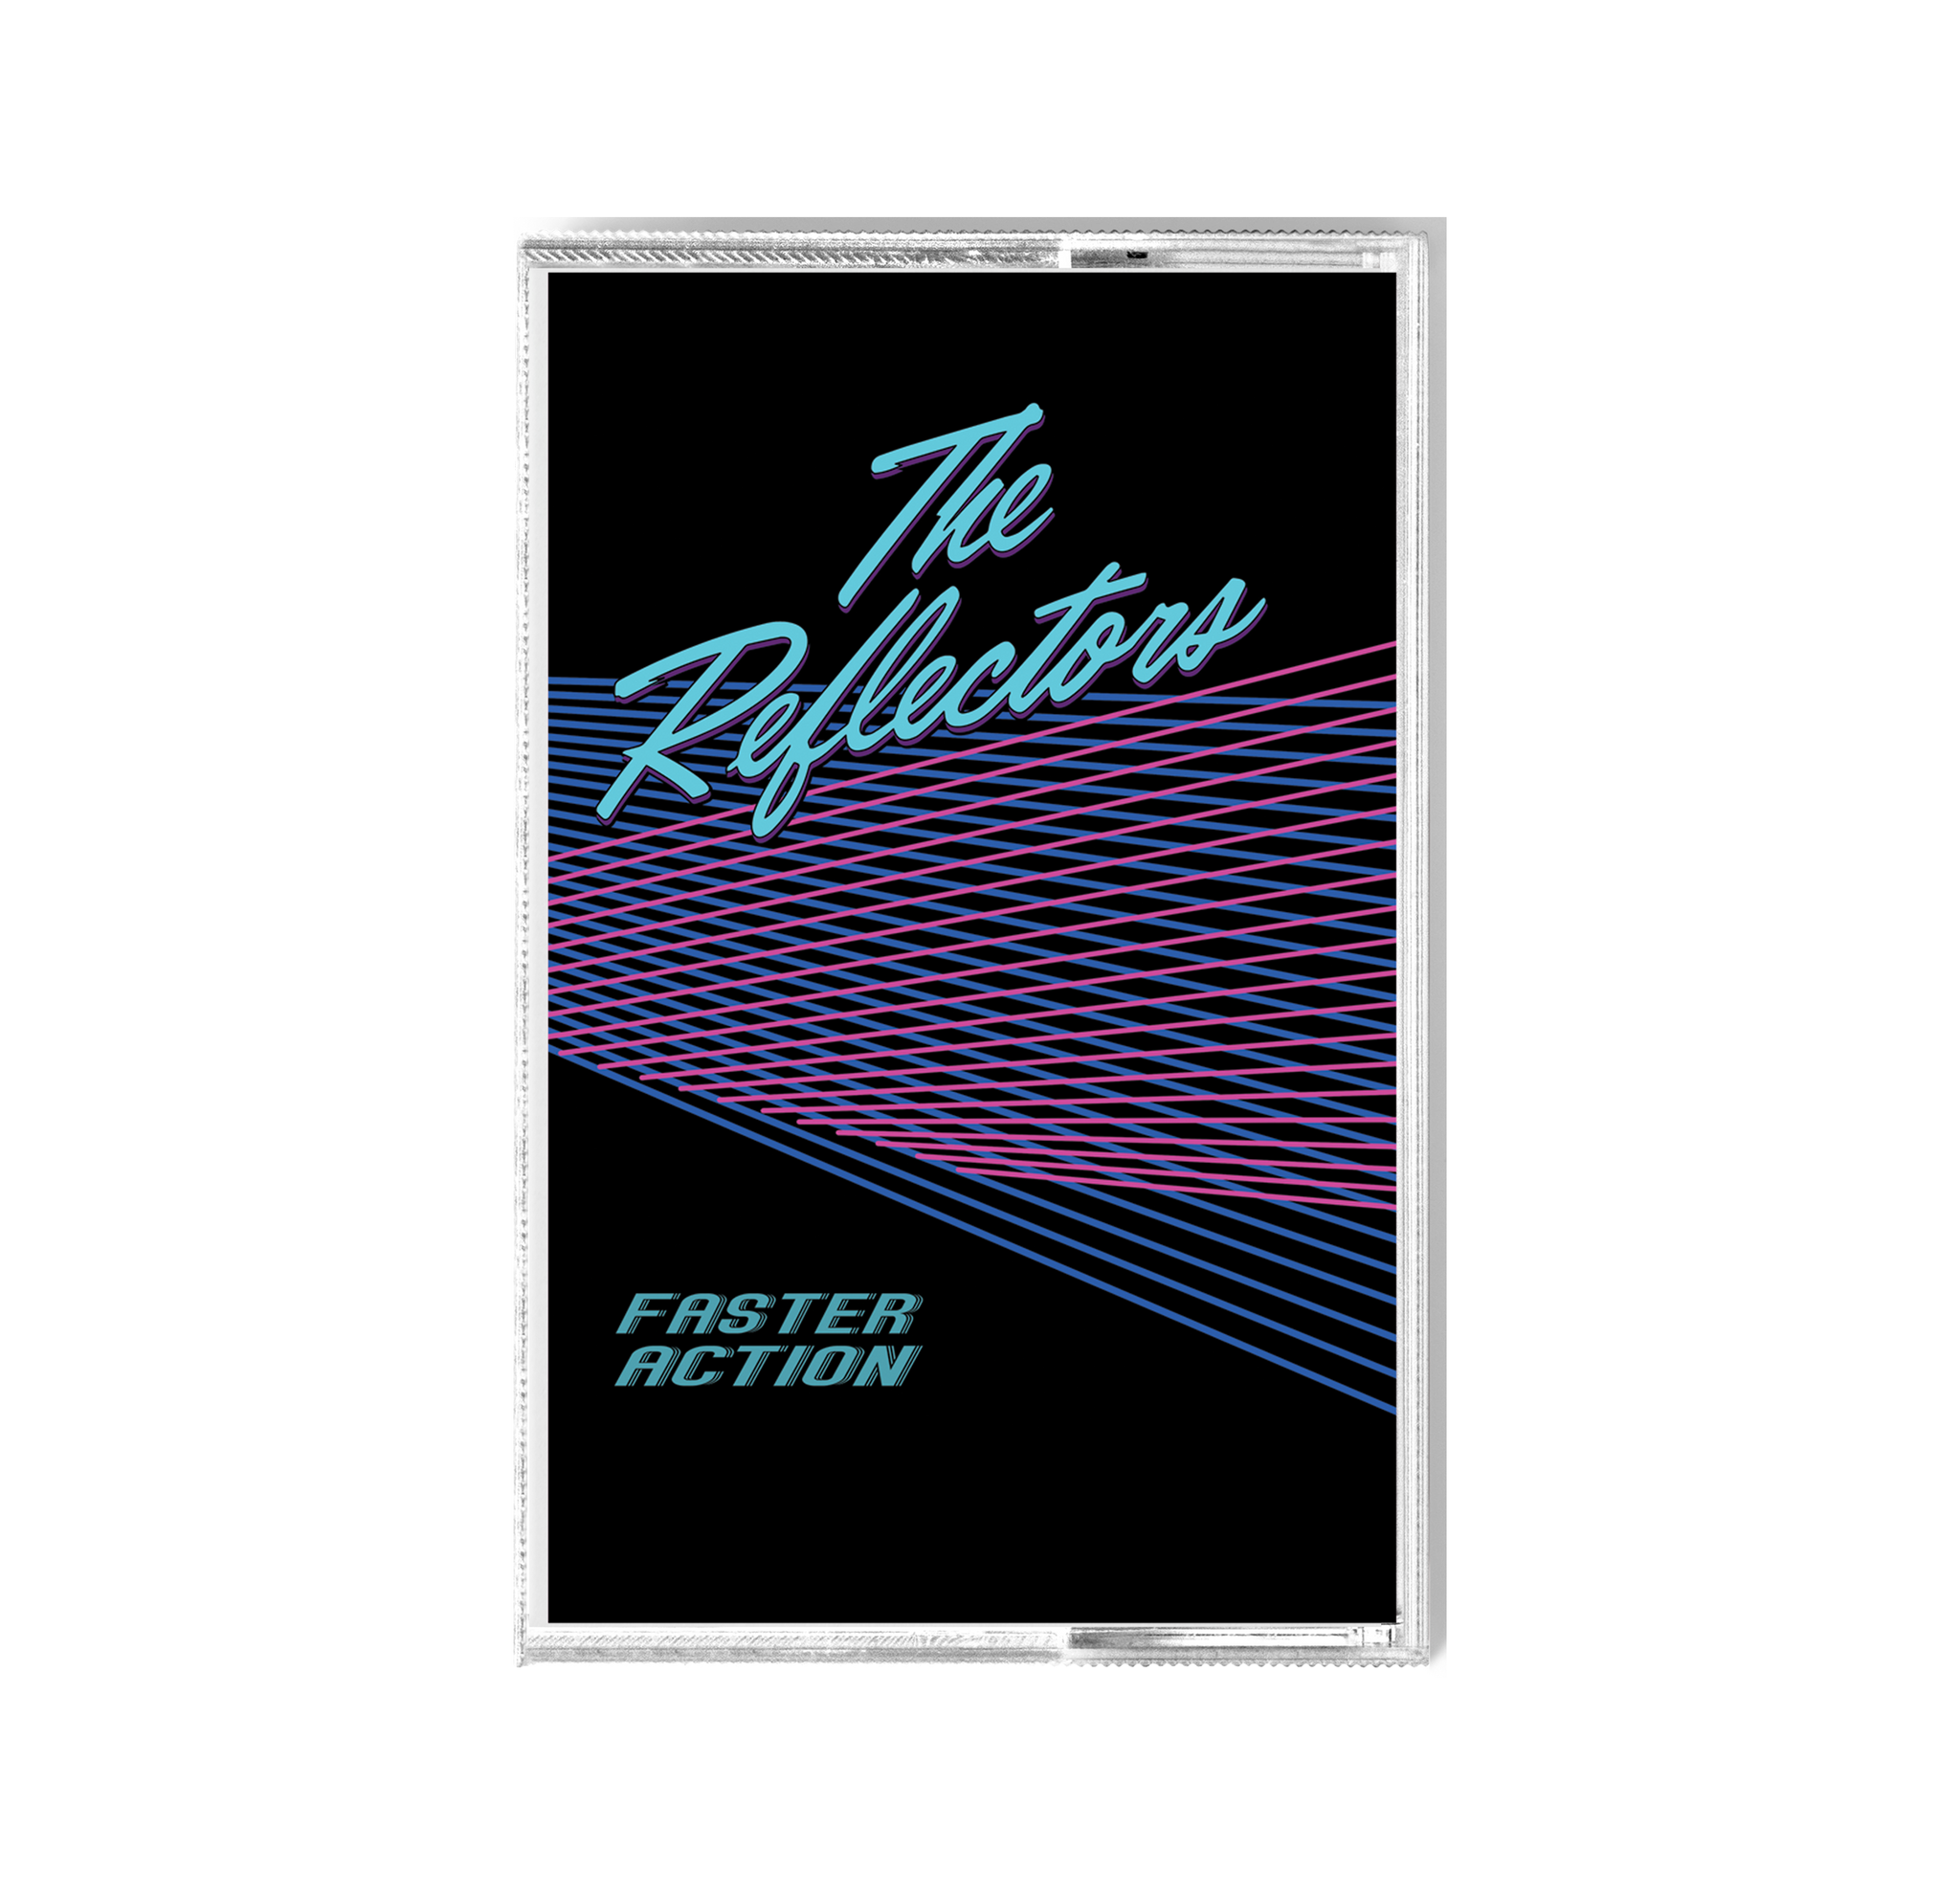 The Reflectors 'Faster Action' Cassette